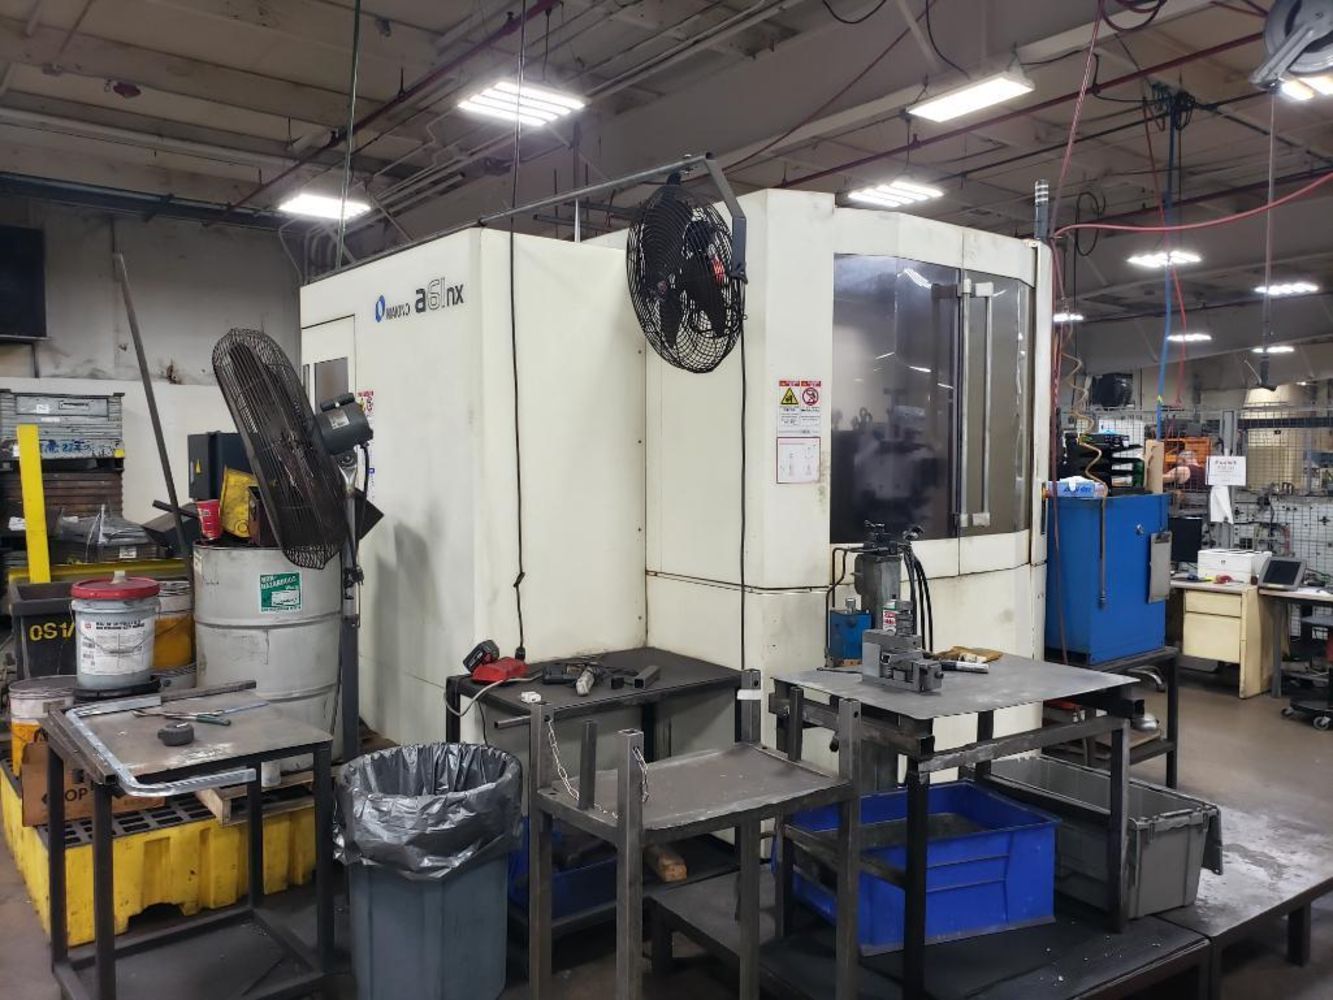 NO RESERVE Auction! 2016 Makino Machining Center. Model A61nx. Low Hour, Late Model Machine.